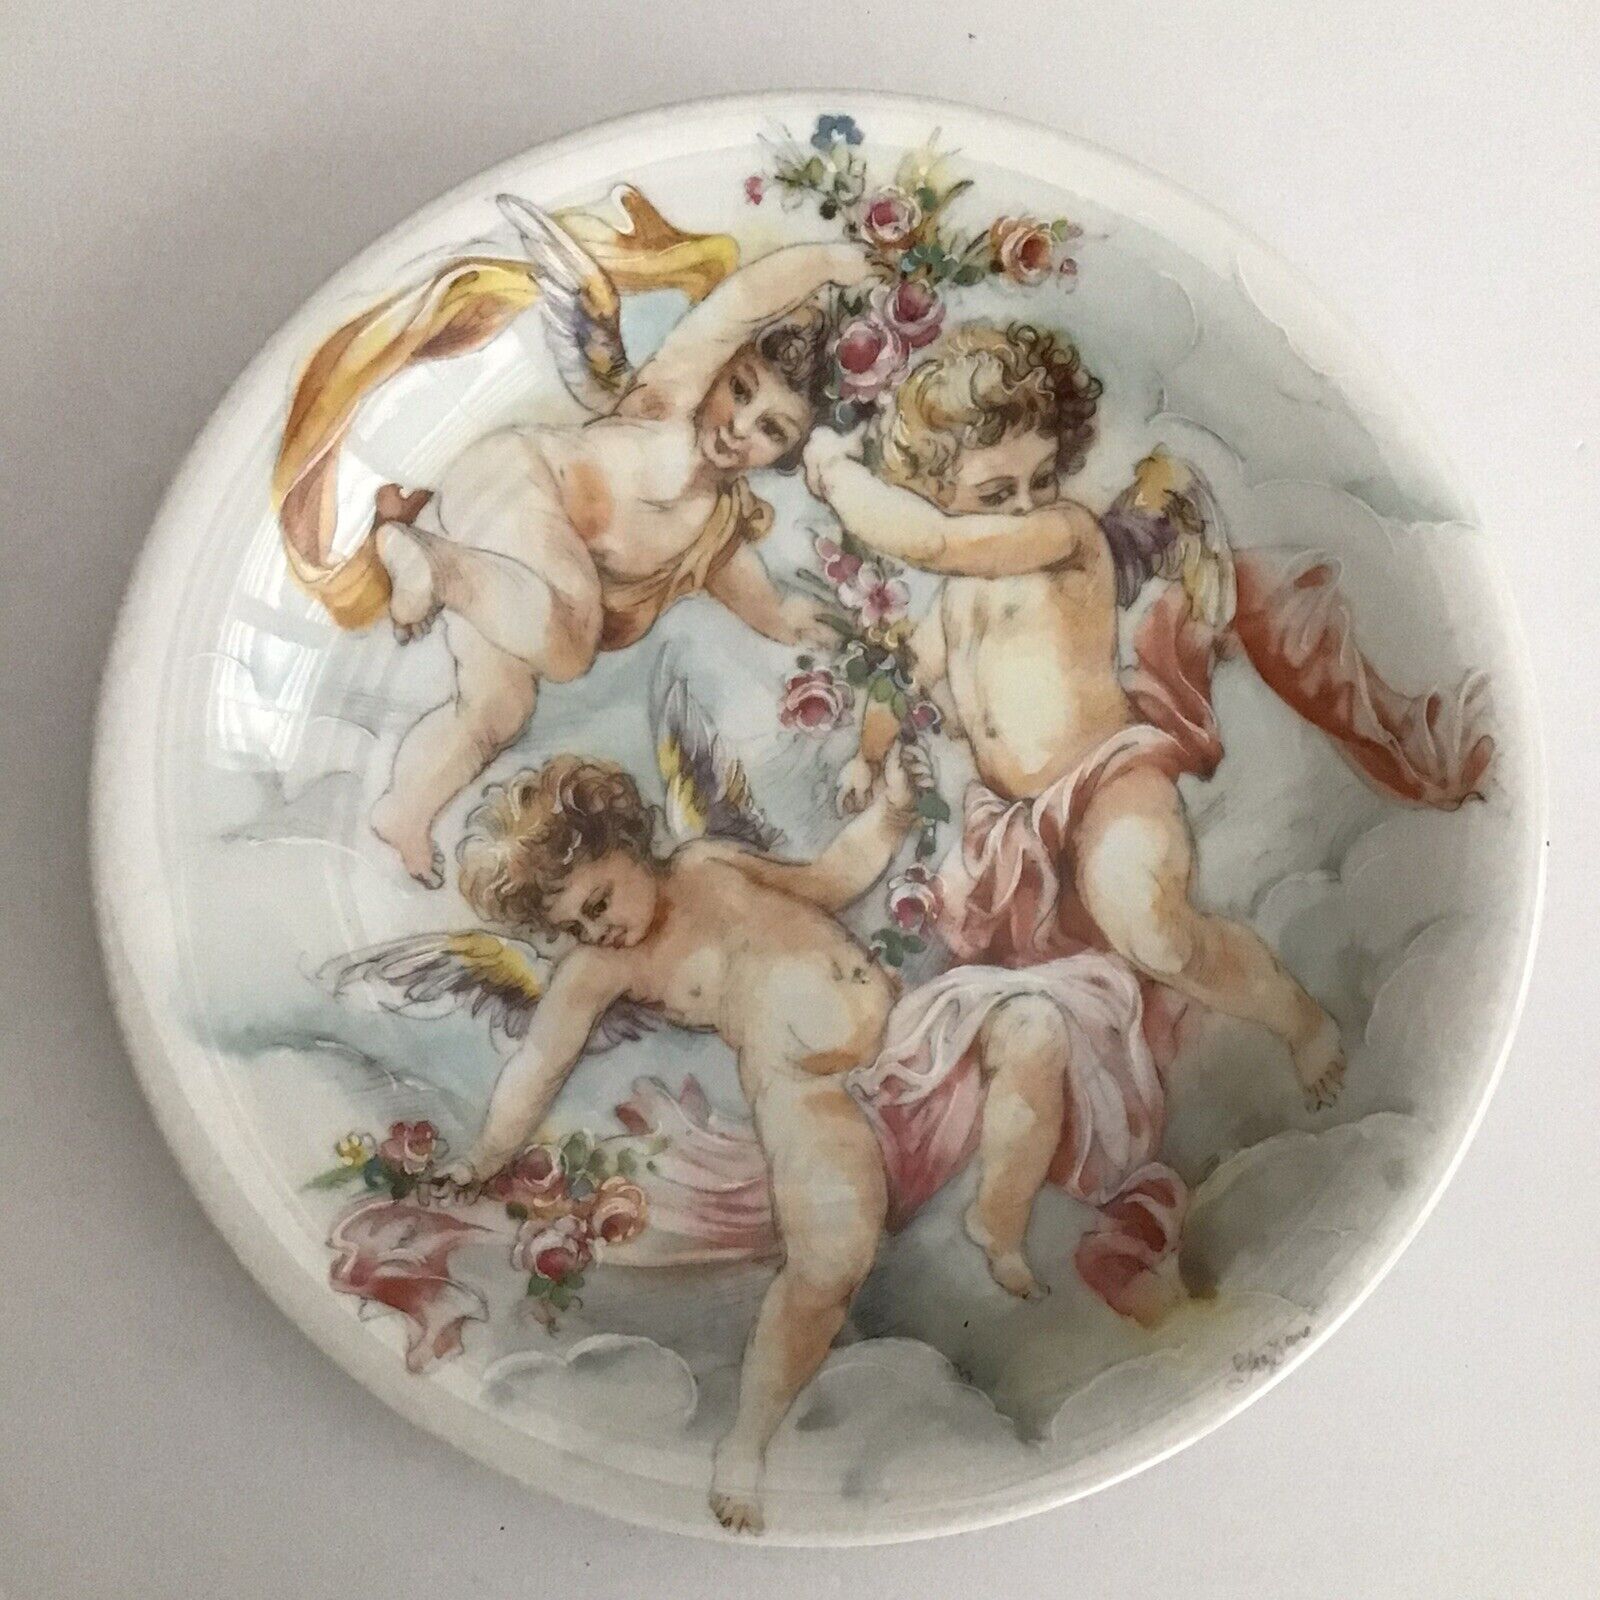 Gold Plated R. Limoges France Plate Dish 7.5” Hand Painted 3 Cherubs Porcelain